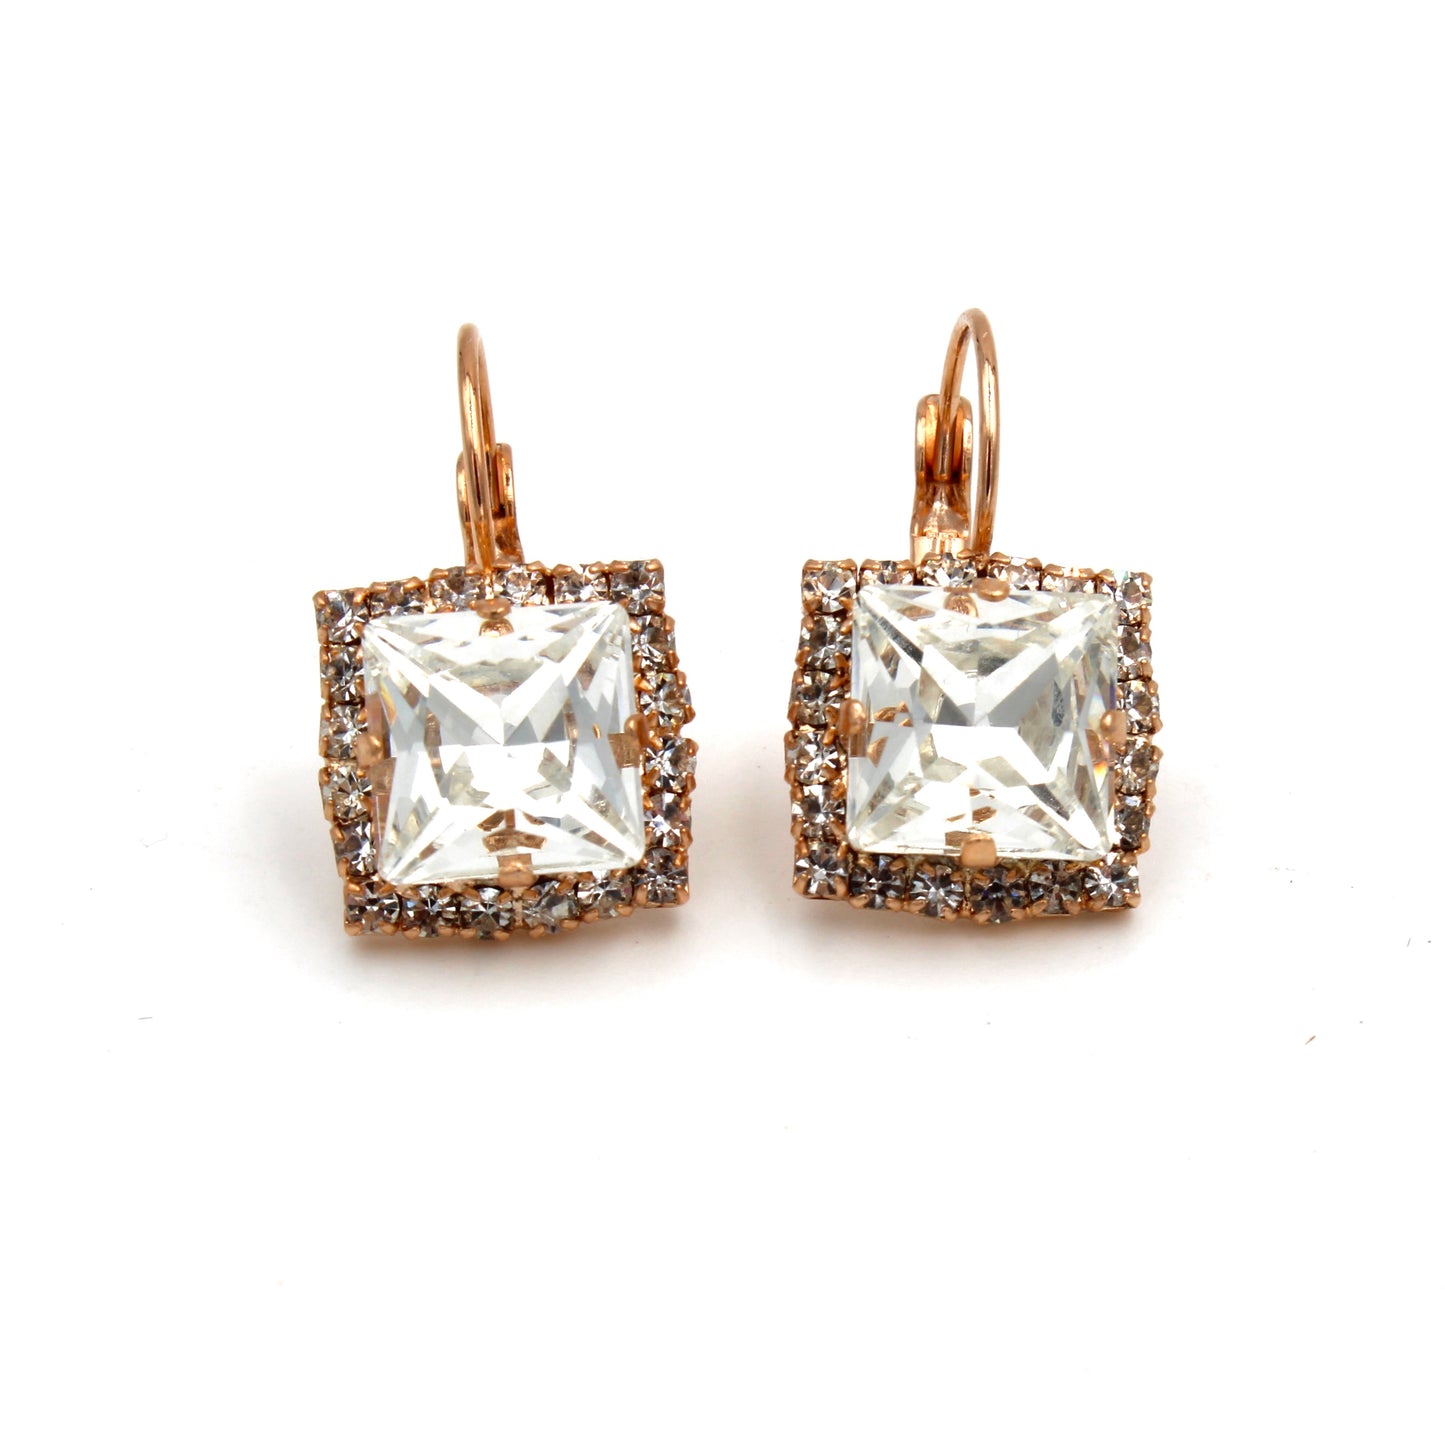 Magic Rock Square Crystal Earrings by LaHola in Rose Gold